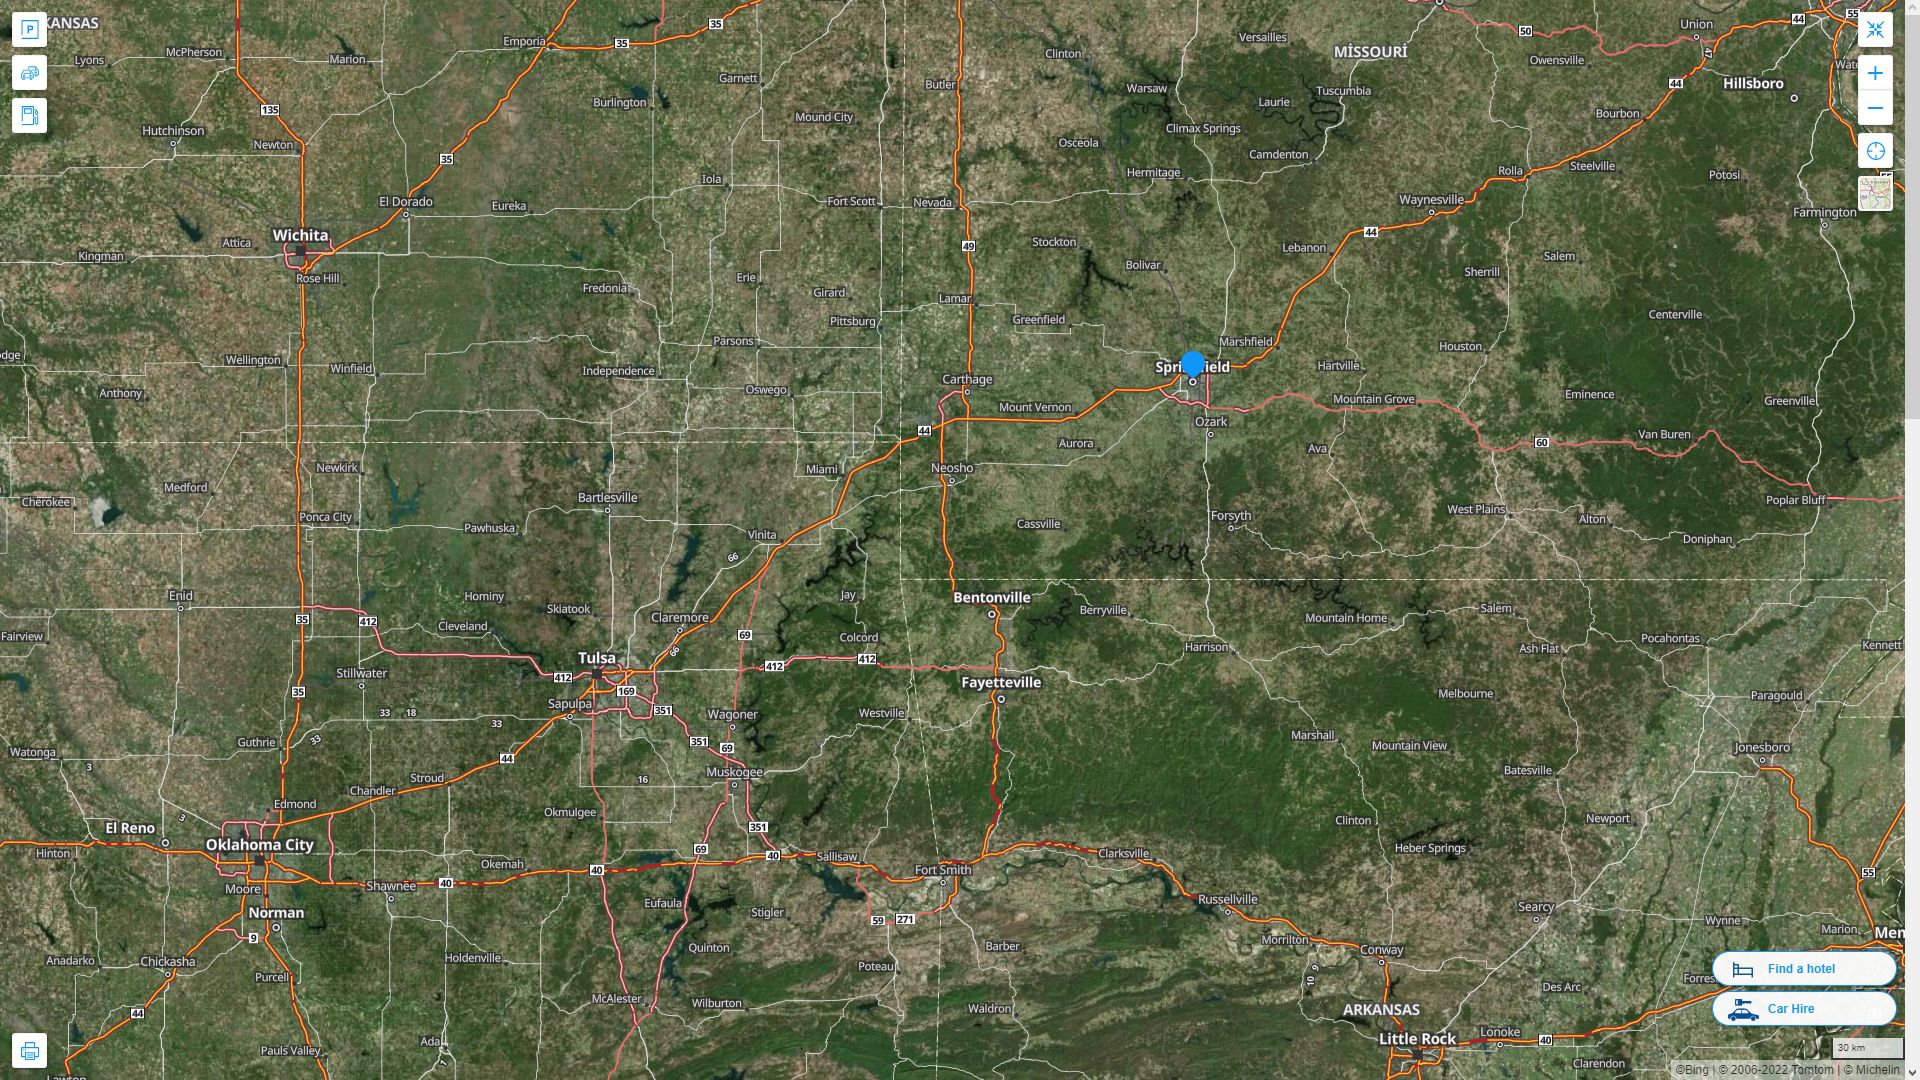 Springfield Missouri Highway and Road Map with Satellite View